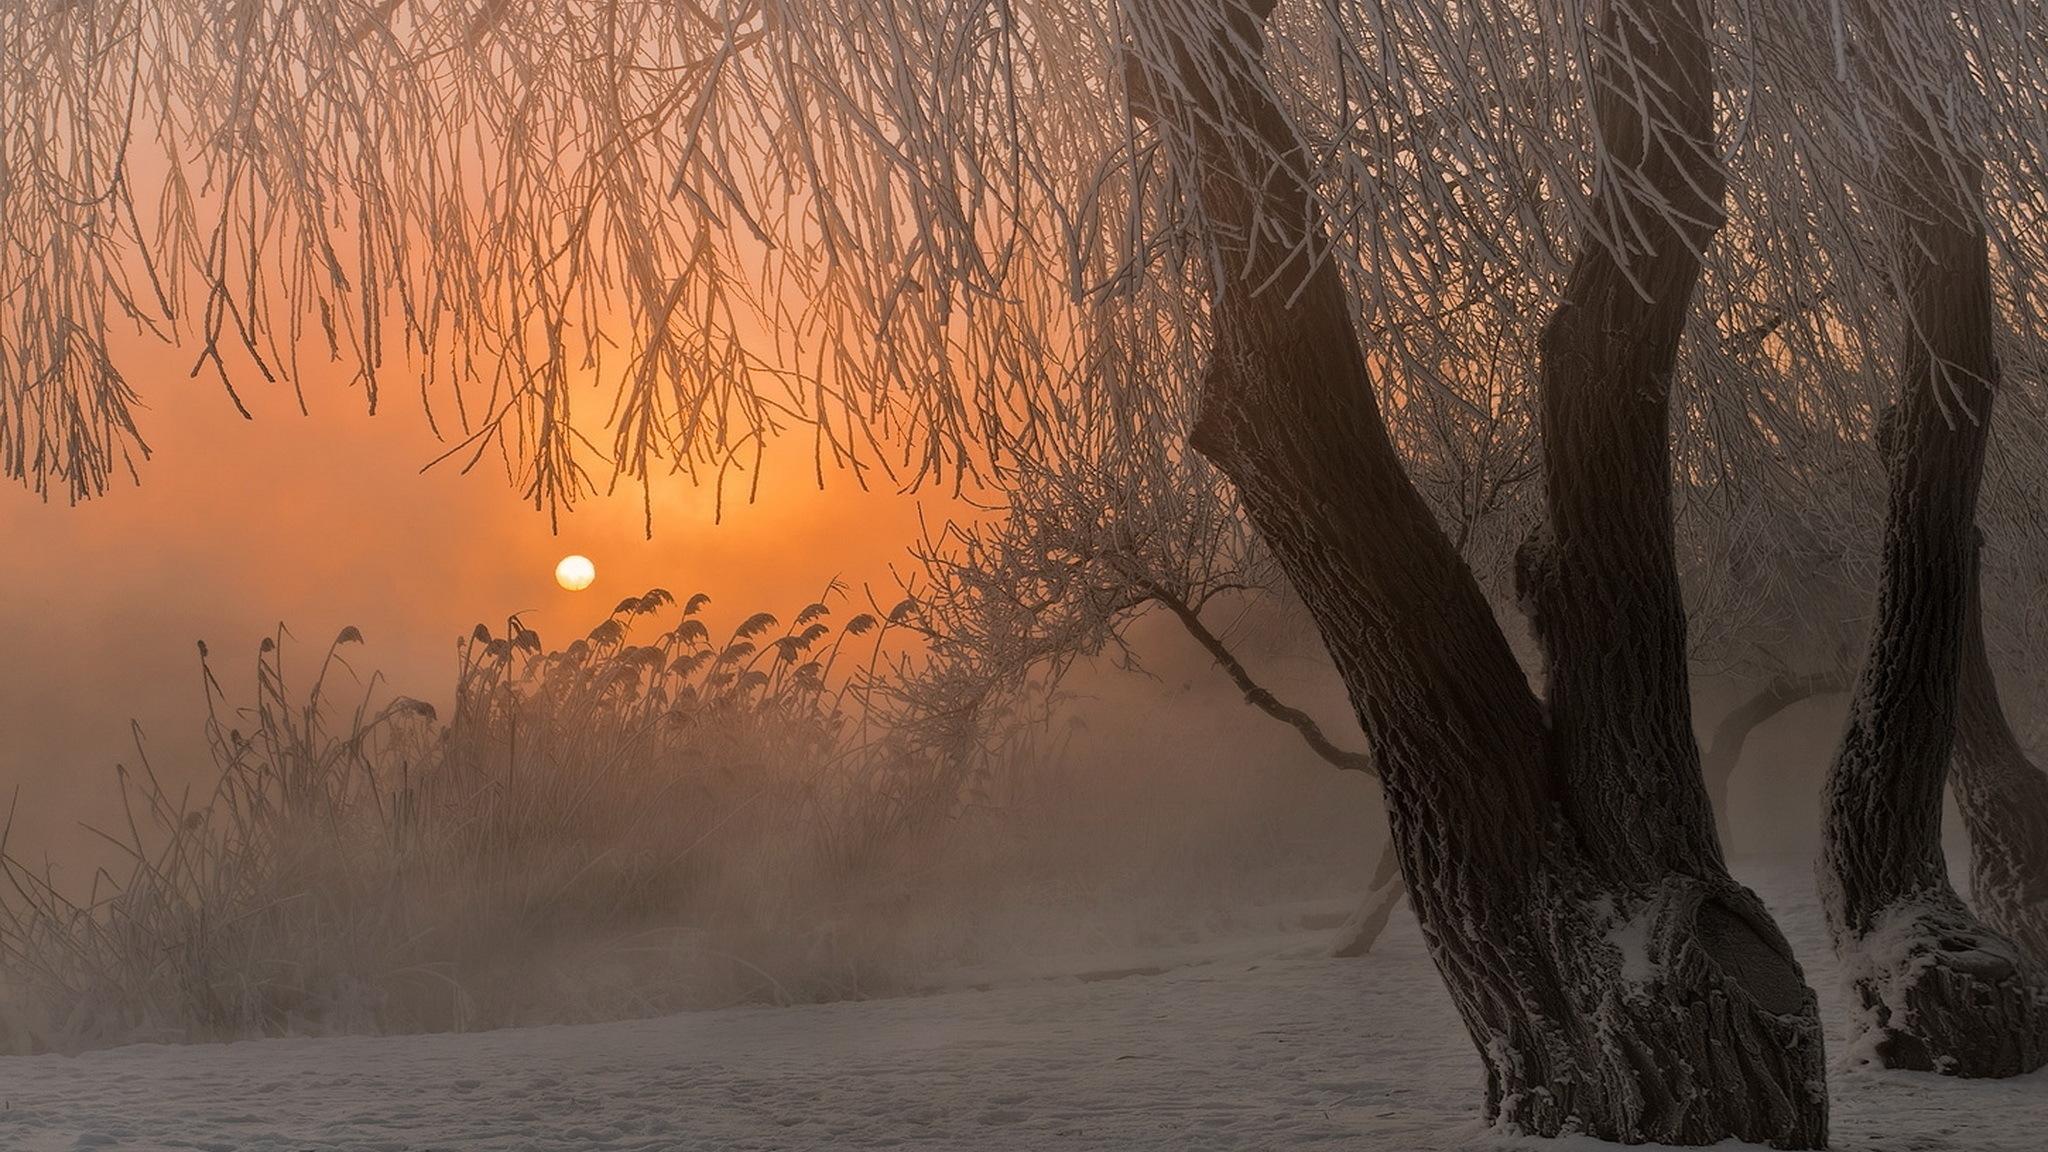 In the frosty morning